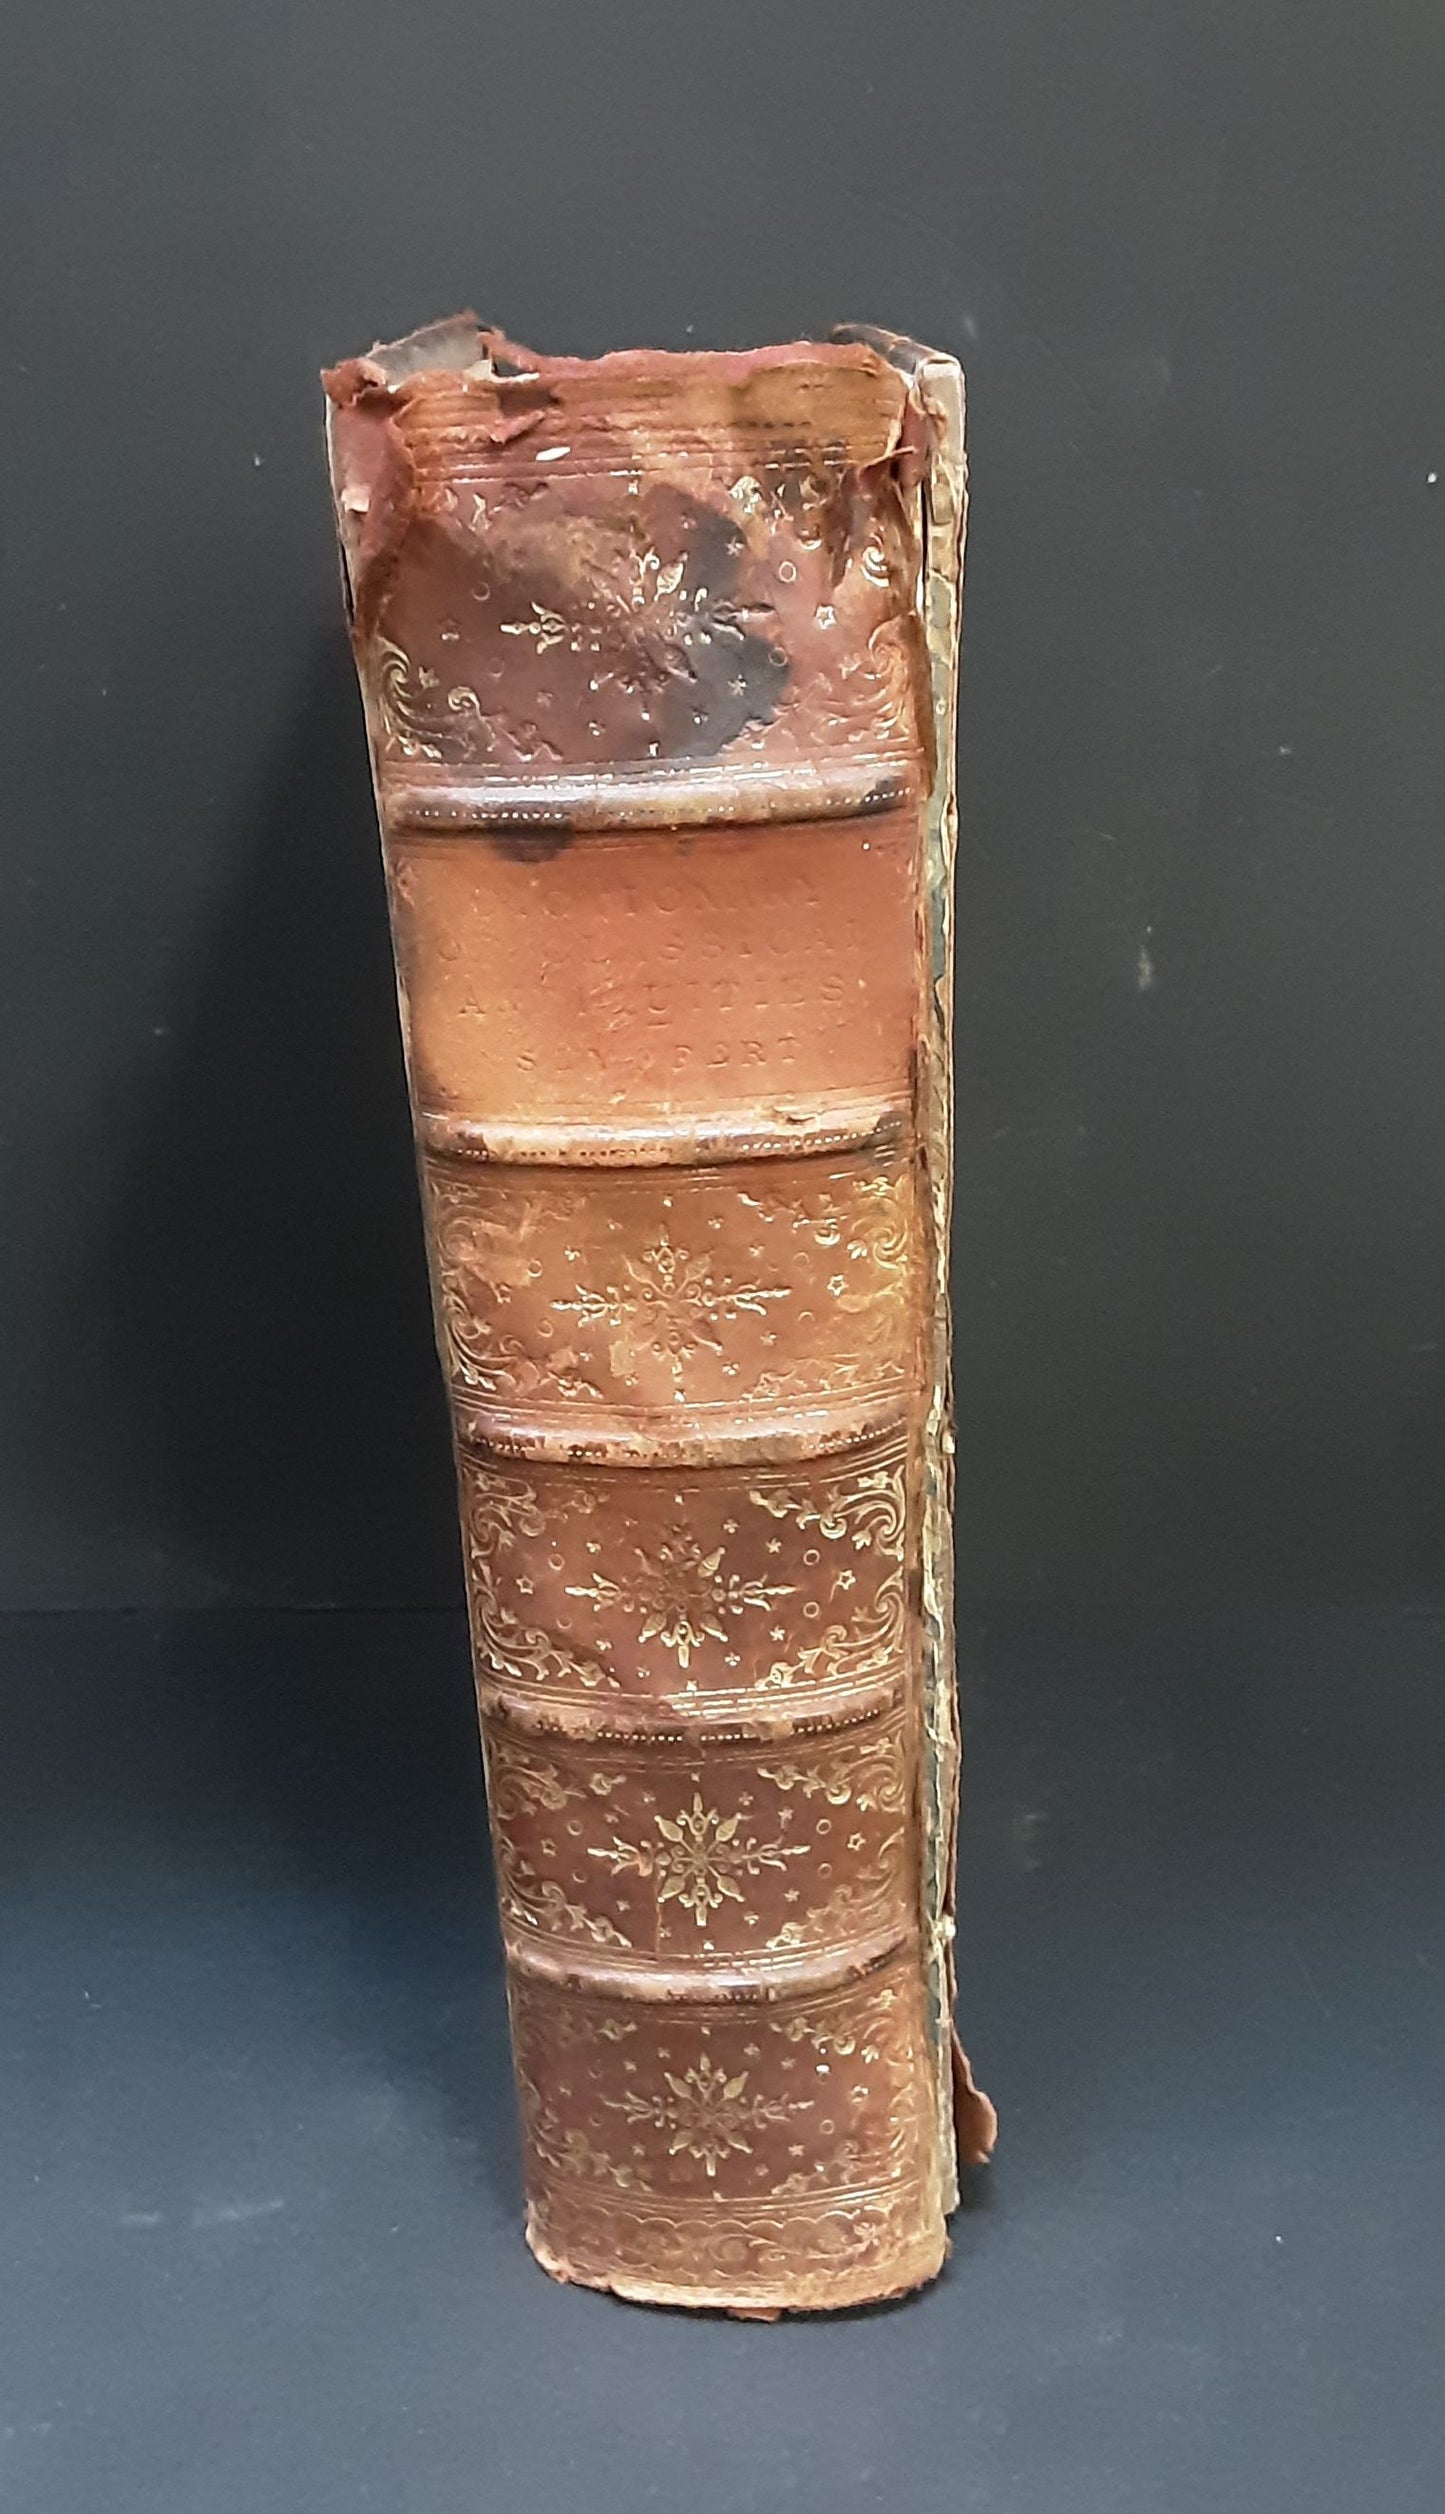 A Dictionary of Classical Antiquities, London: Swan Sonnenschein and Company, 1891